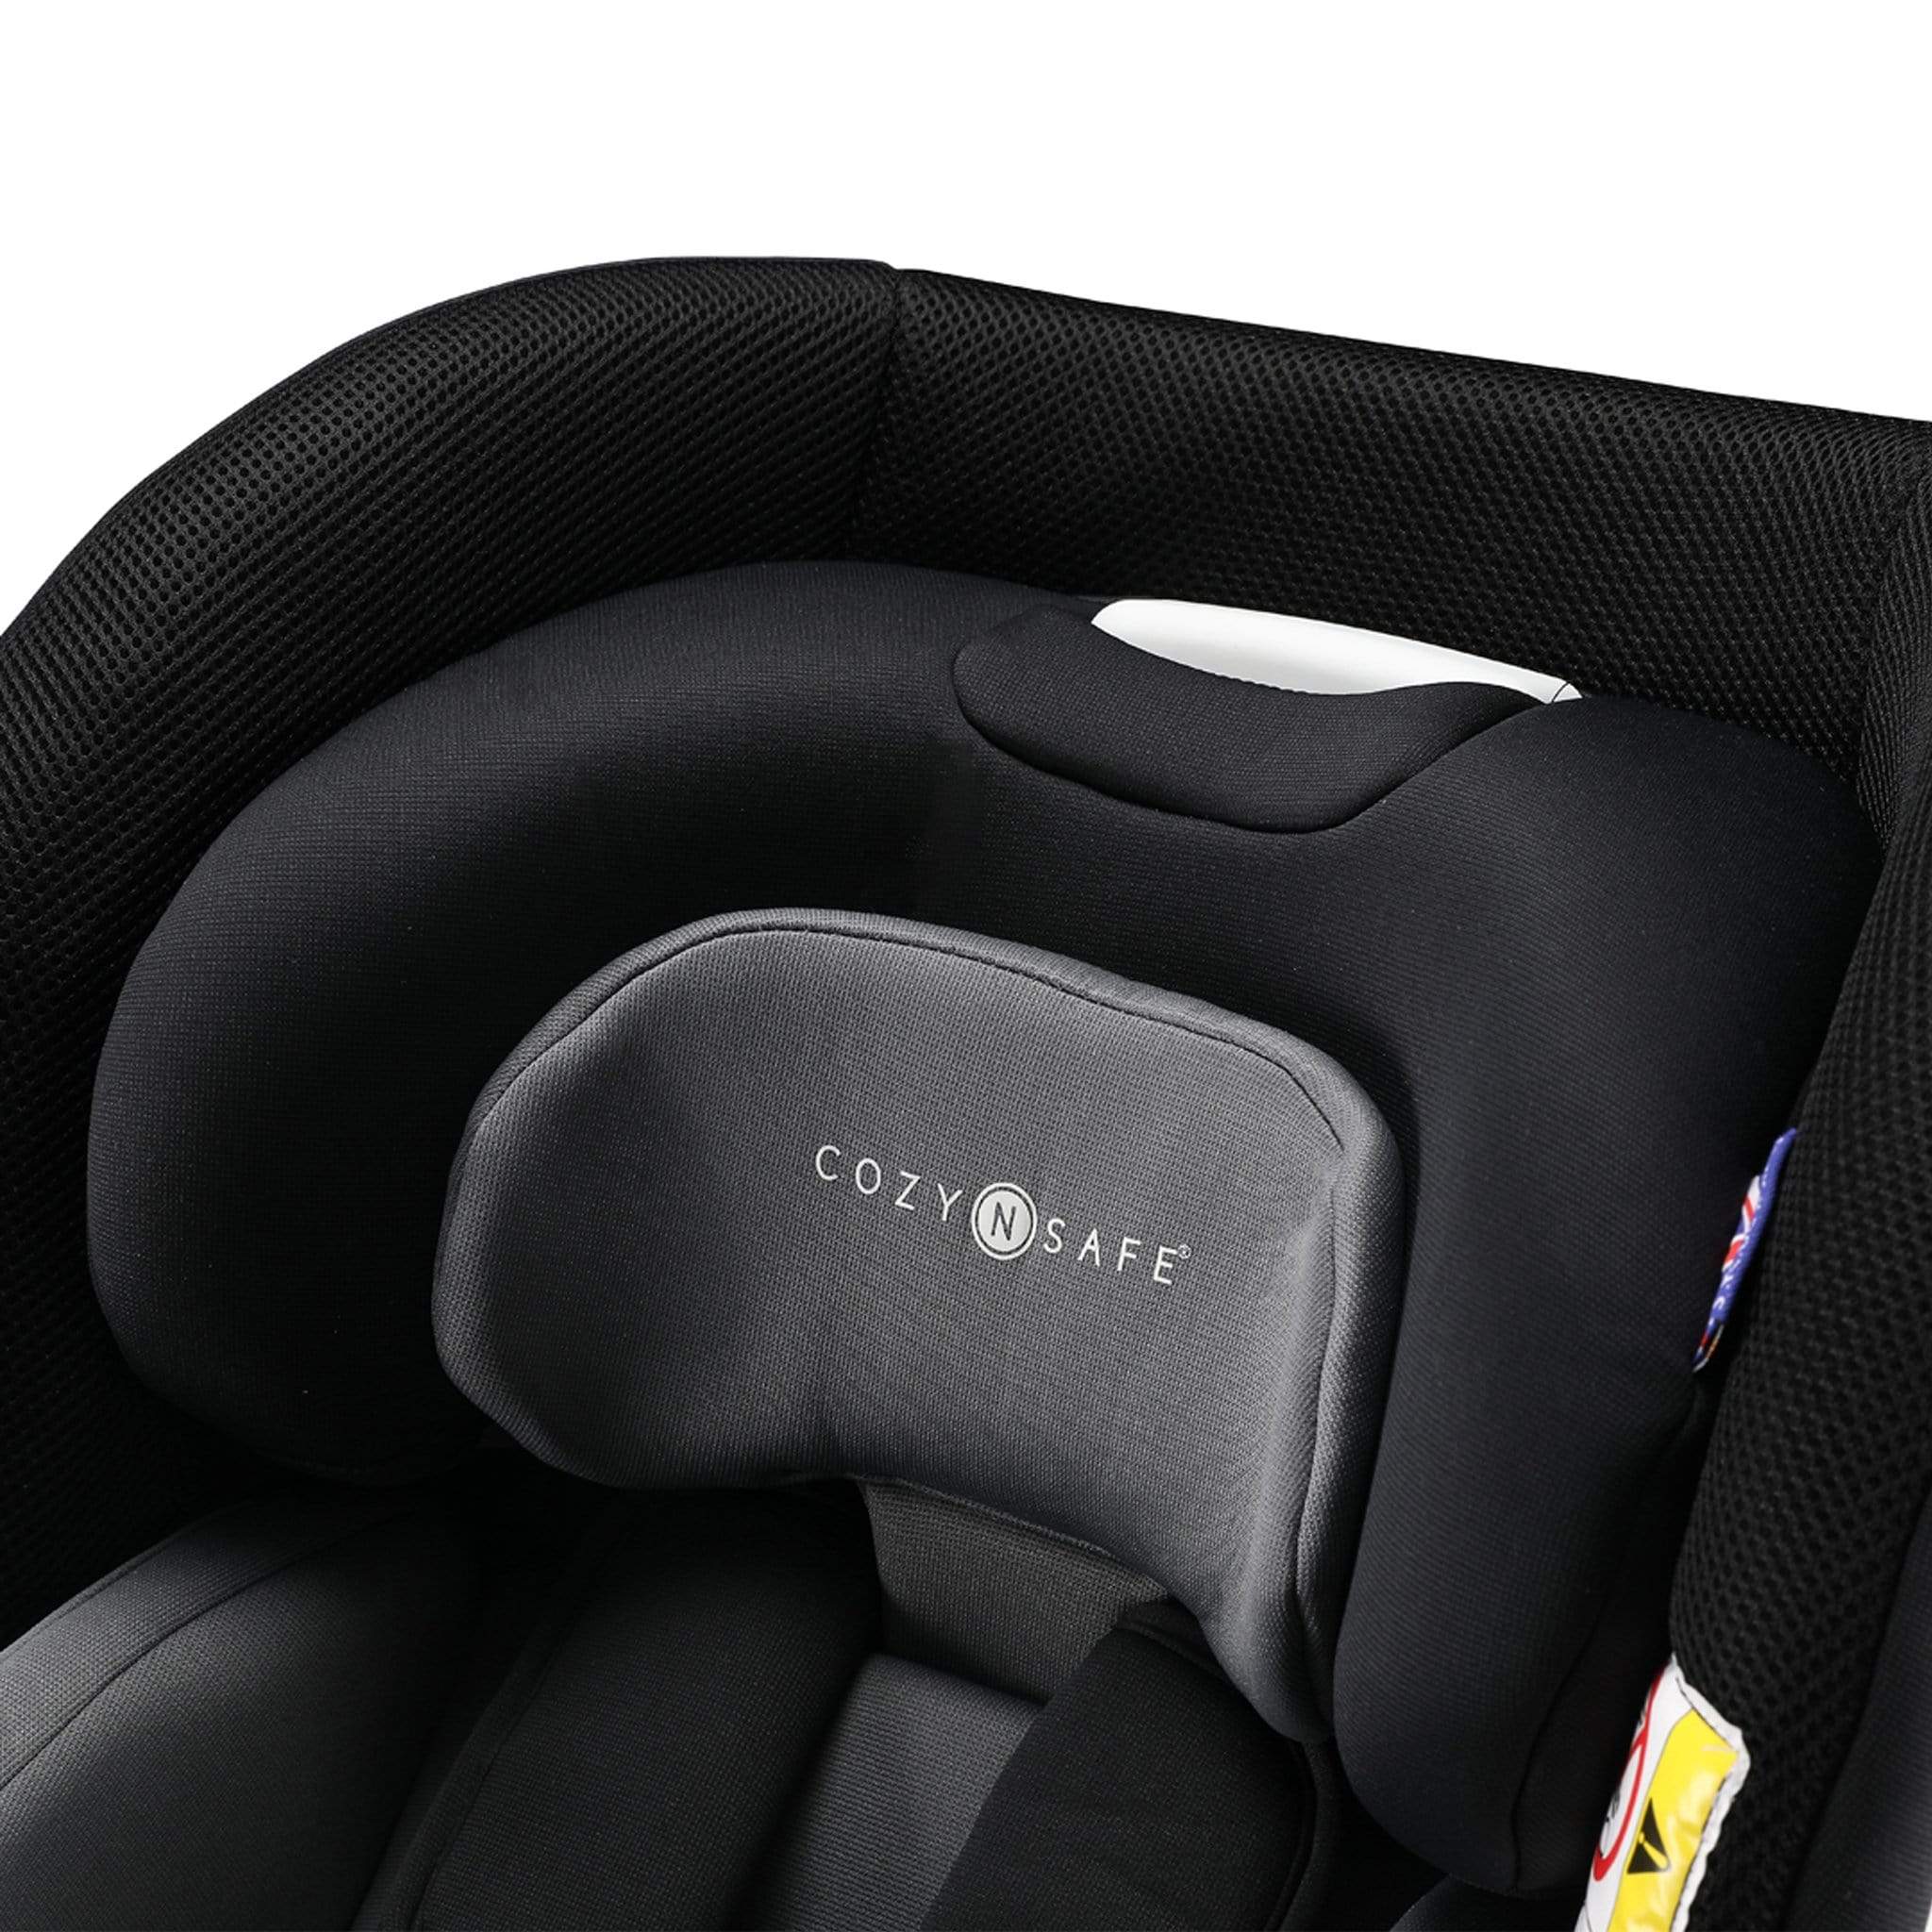 Cozy n Safe i-Size car seats The Cozy N Safe Morgan i-Size 360° Rotation Car Seat in Black and Grey EST-173-Morgan-i-Size